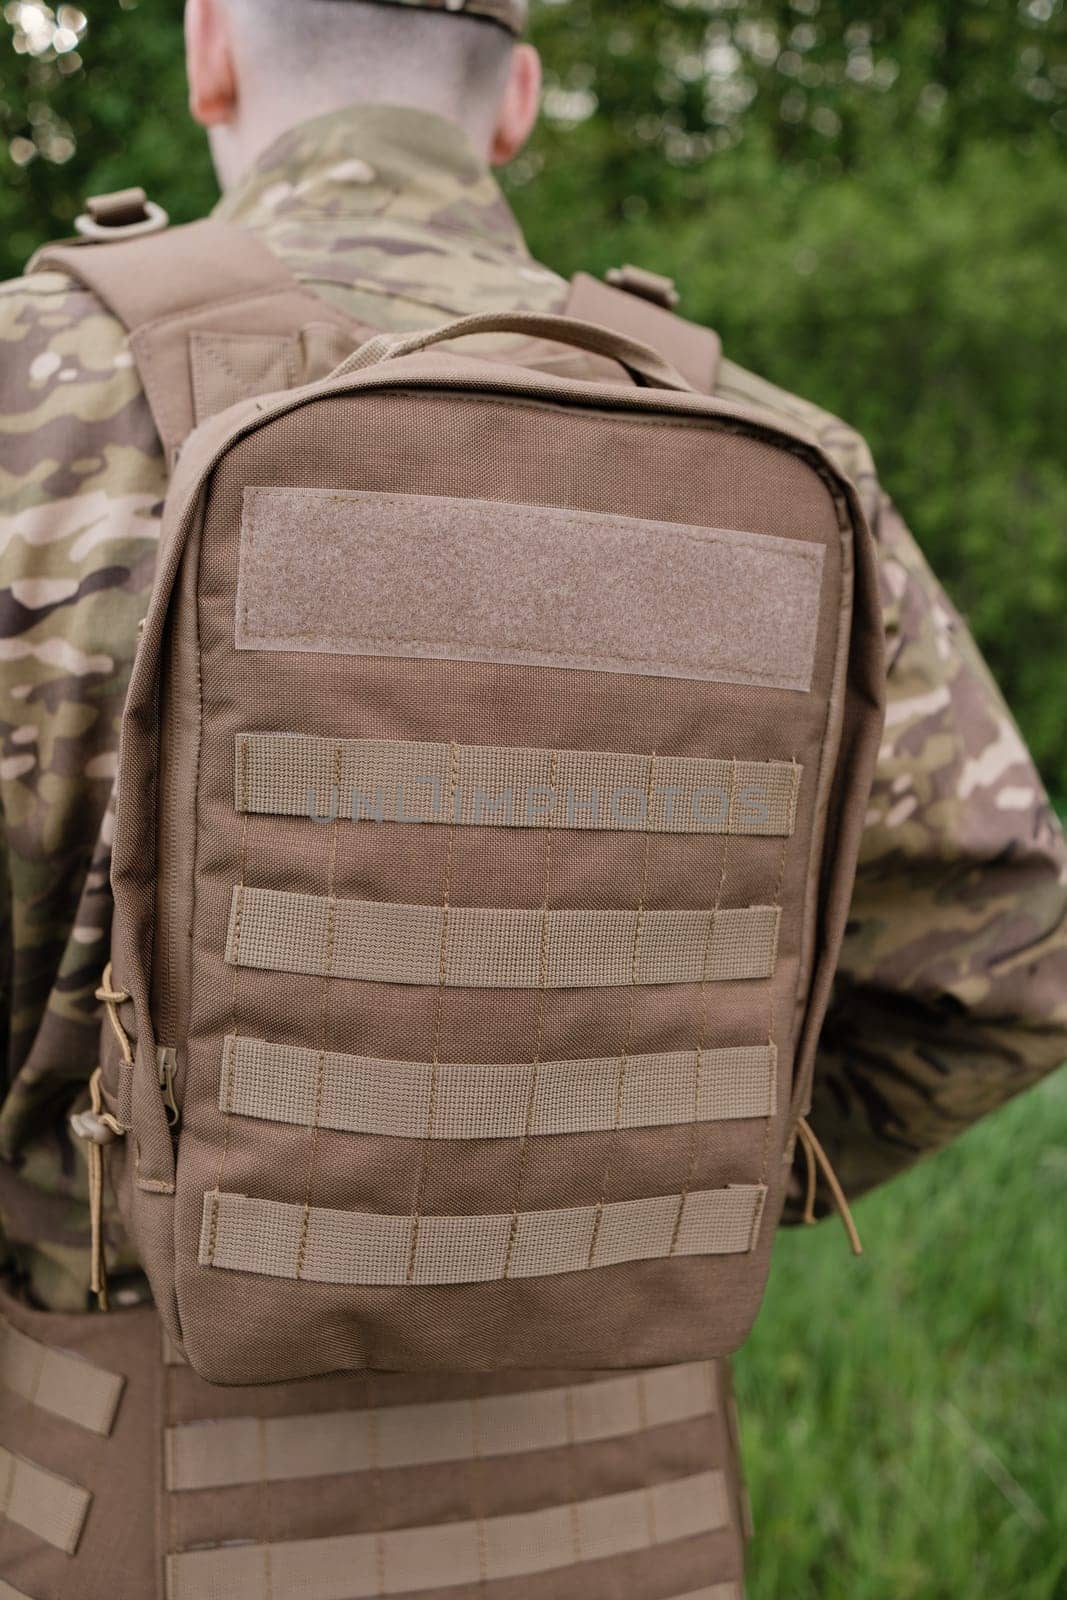 Close-up of Tactical Backpack Details on Soldier by Symonenko